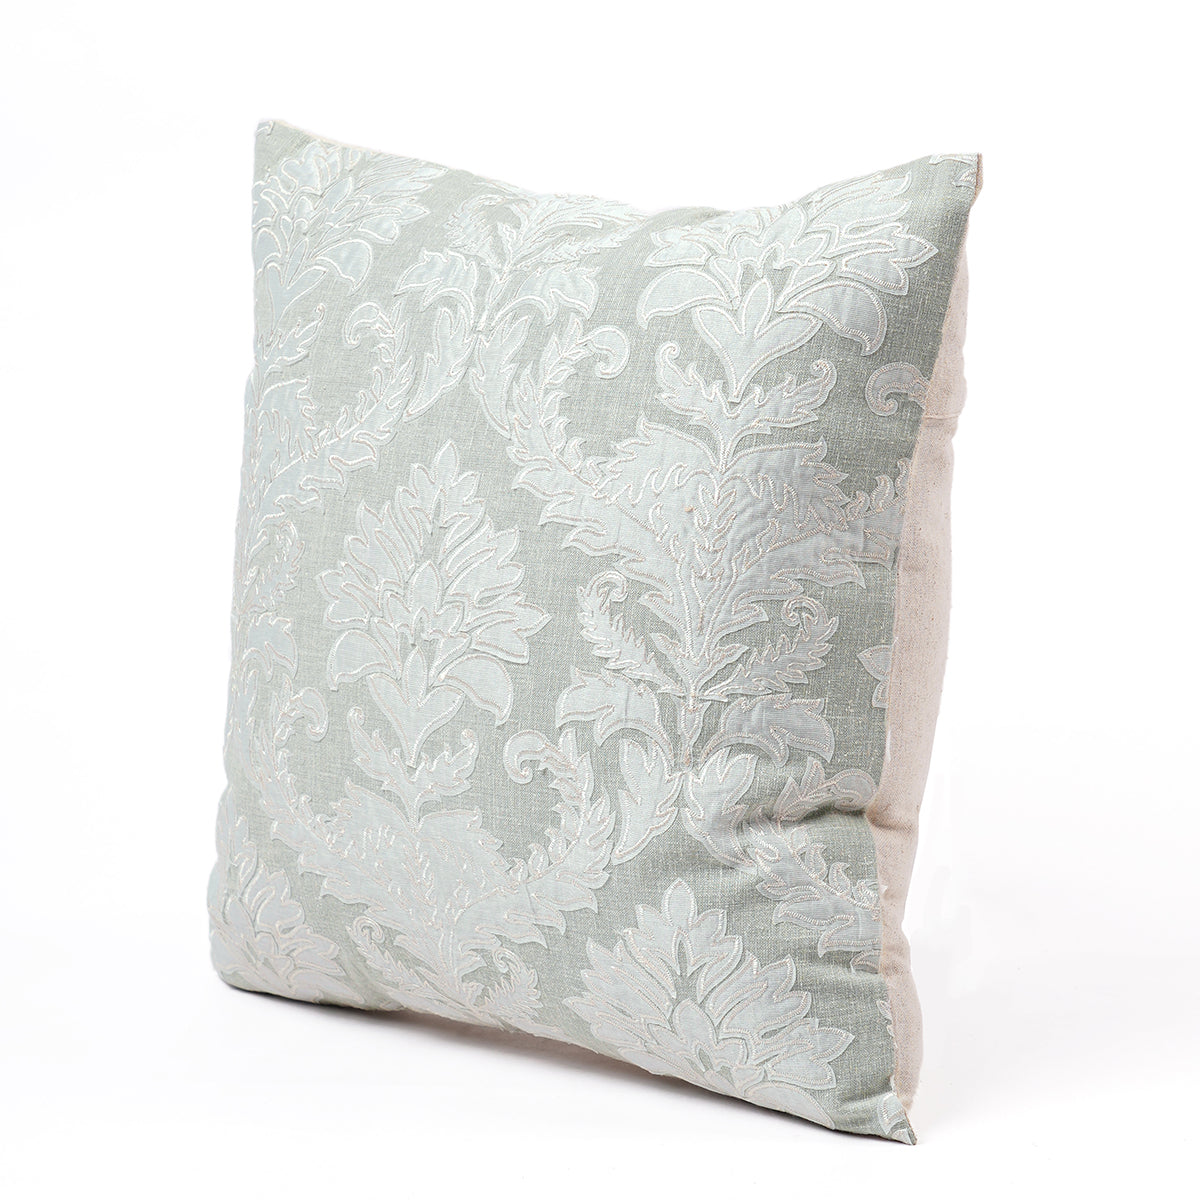 Imperial - Sage Green Damask pattern applique and Embroidery pillow cover, Linen blend fabric, available in 16X16 inches, custom sizes on request